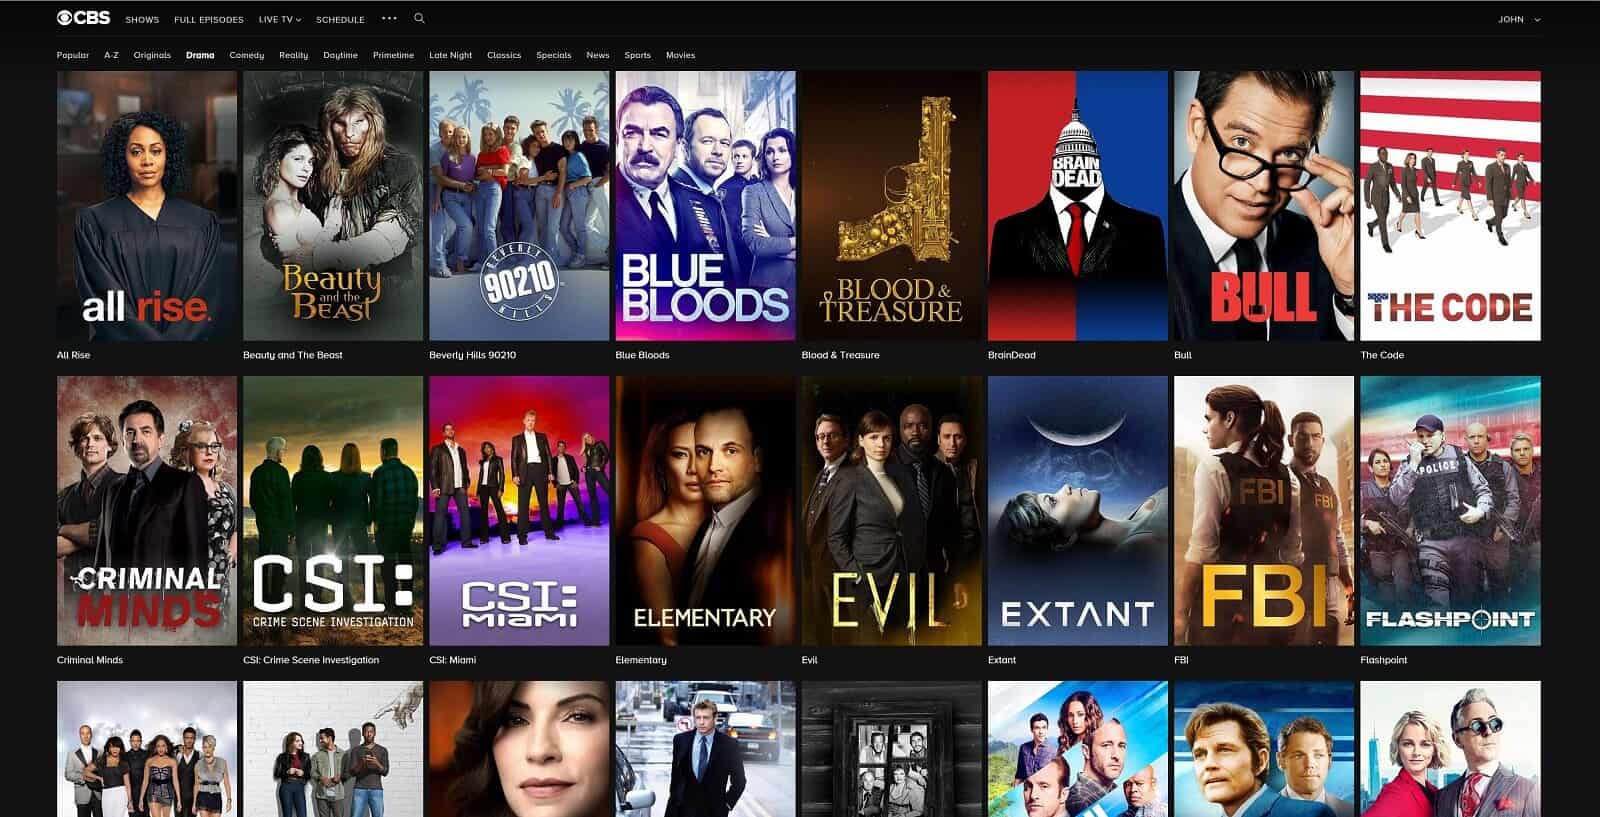 Is CBS All Access Worth It? Here